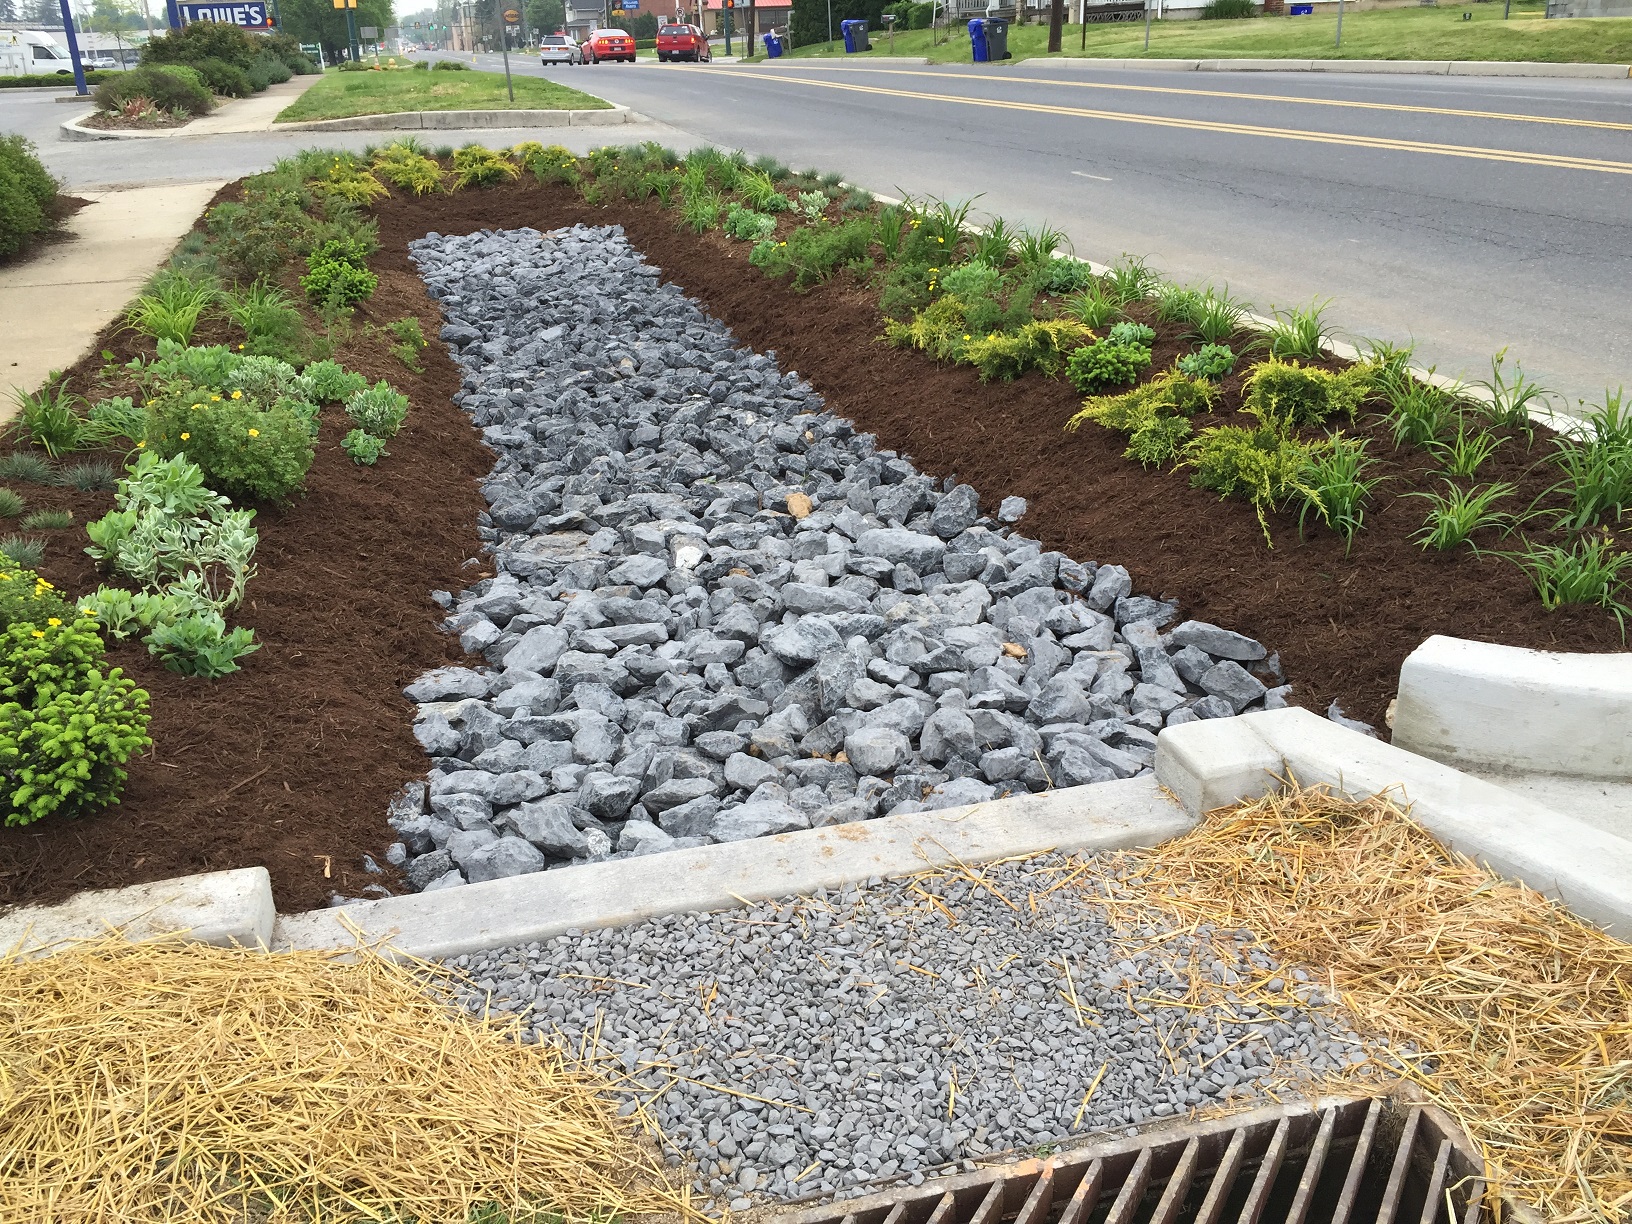 A stormwater control measure along a highway helps to protect the environment by giving stormwater a place to easily drain, improving roadway conditions for drivers.